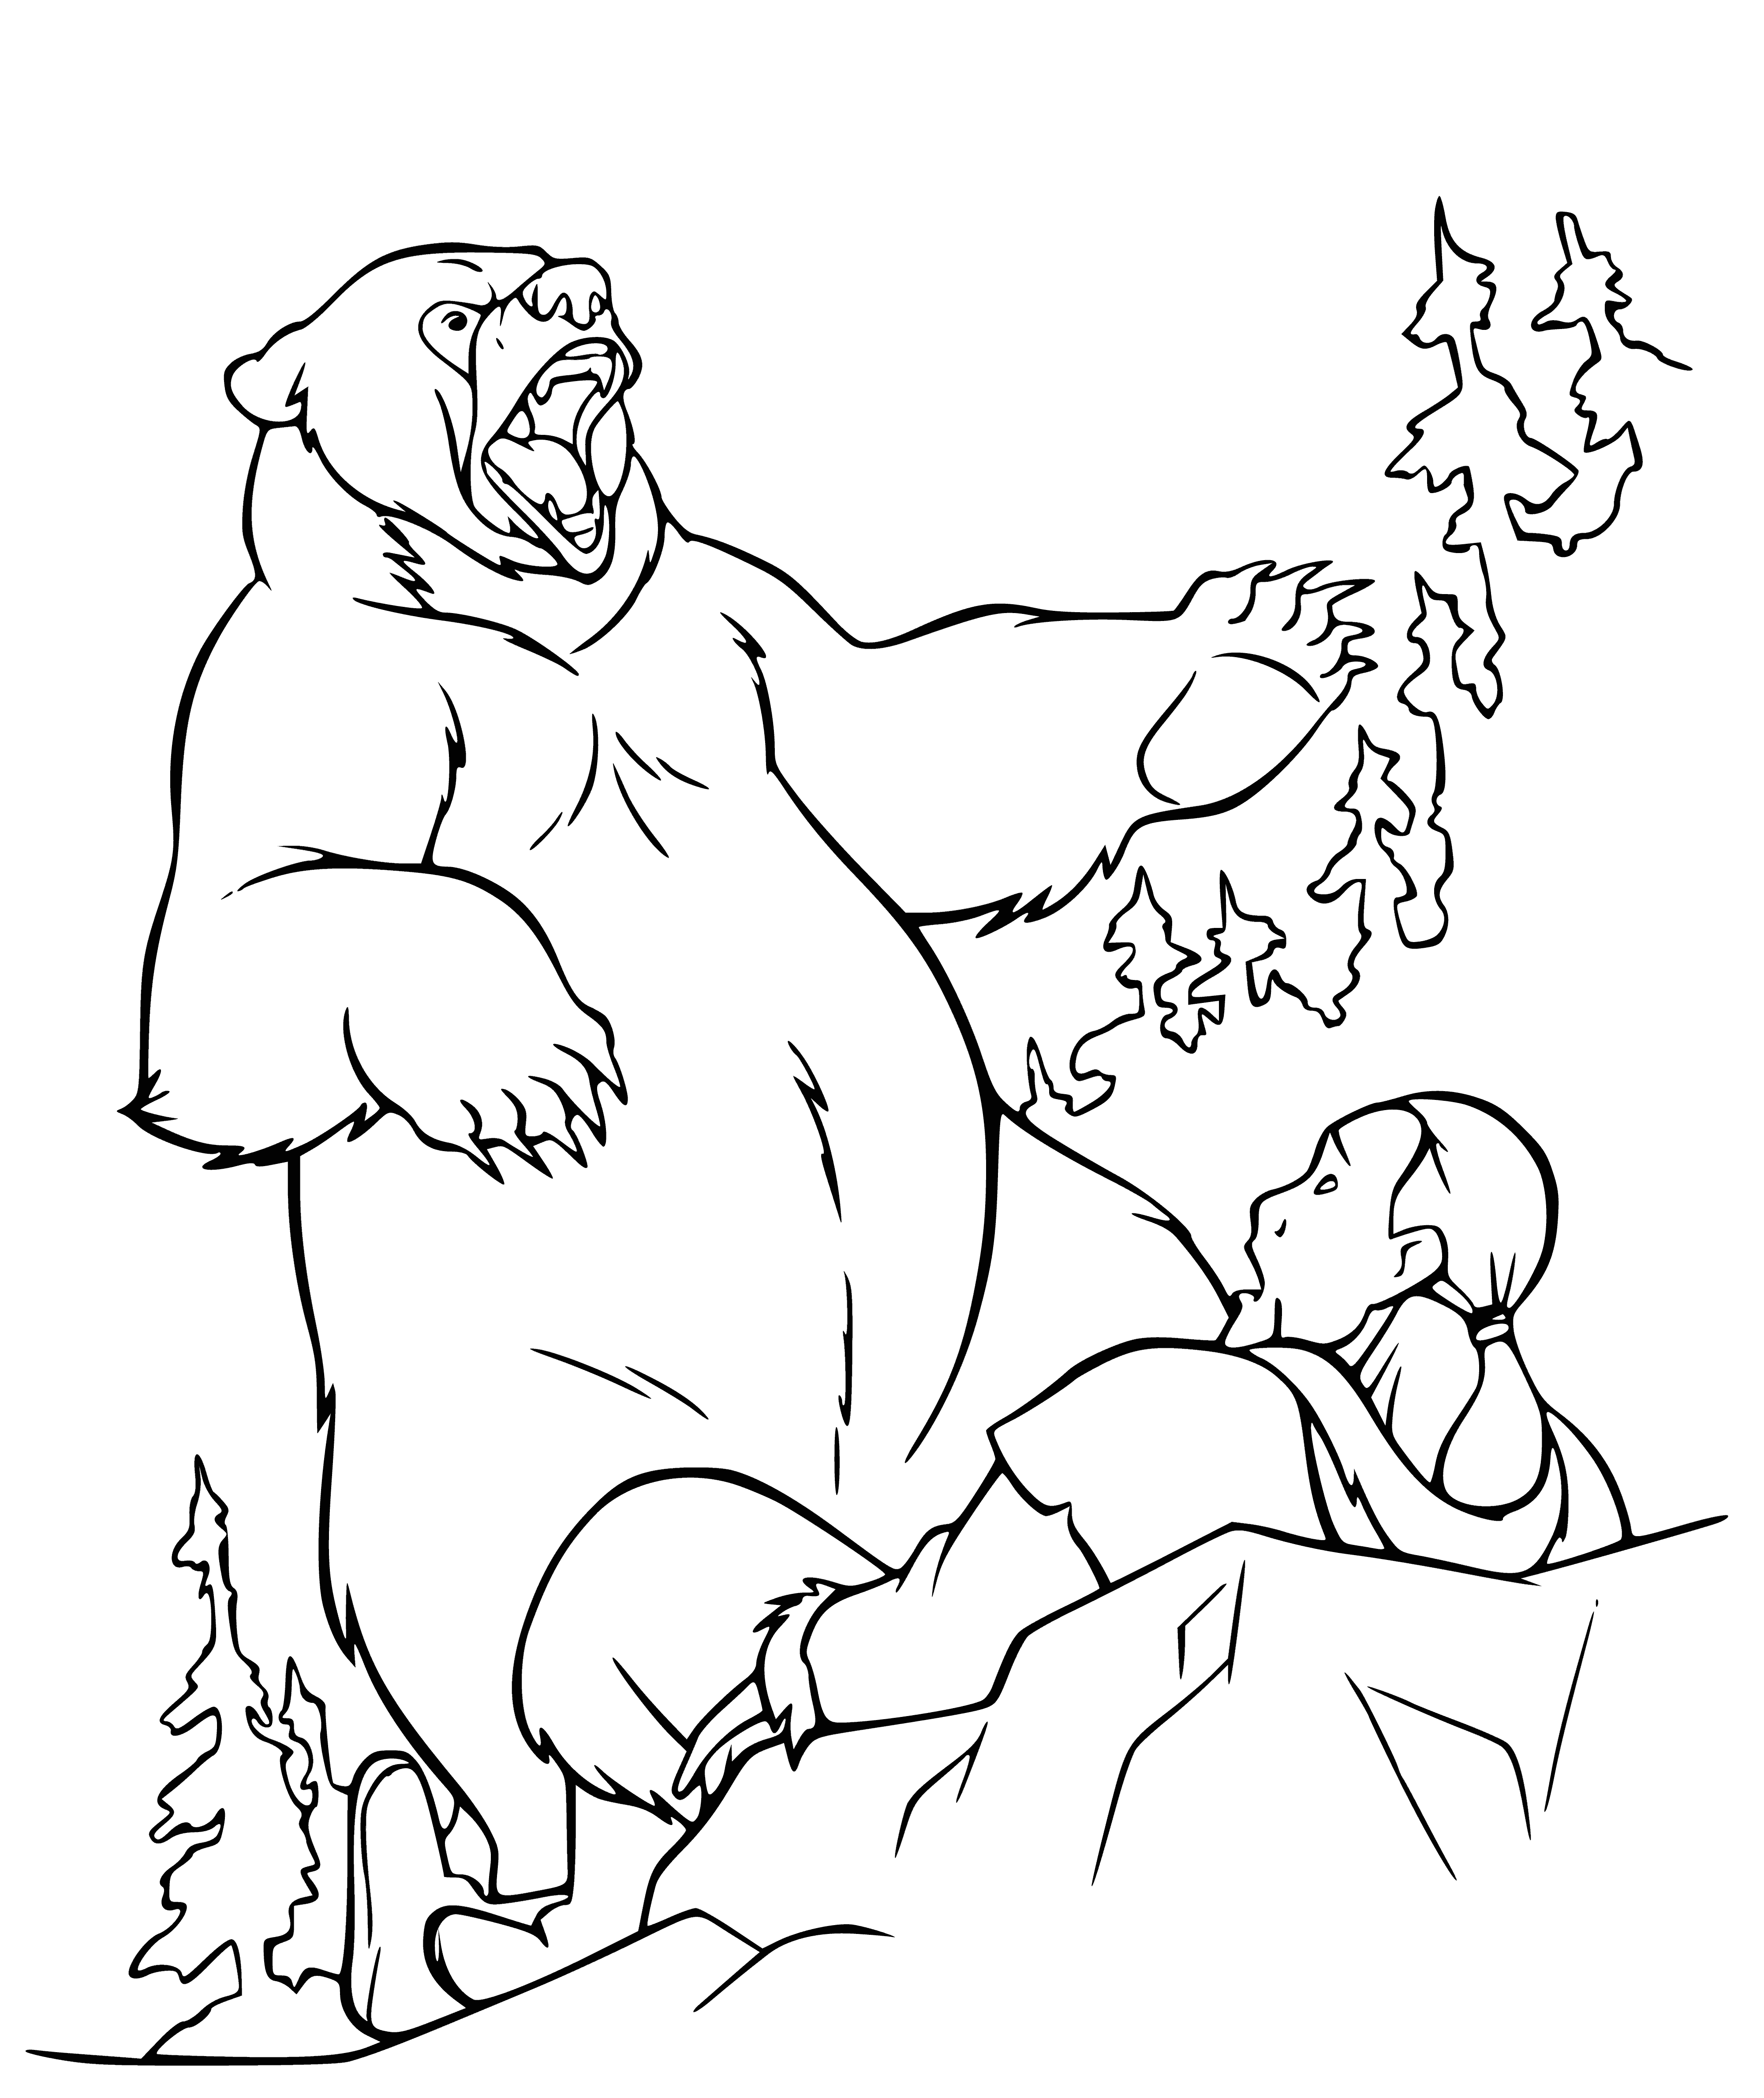 coloring page: Person defends themself from large attacking bear, lying on the ground with arms up.